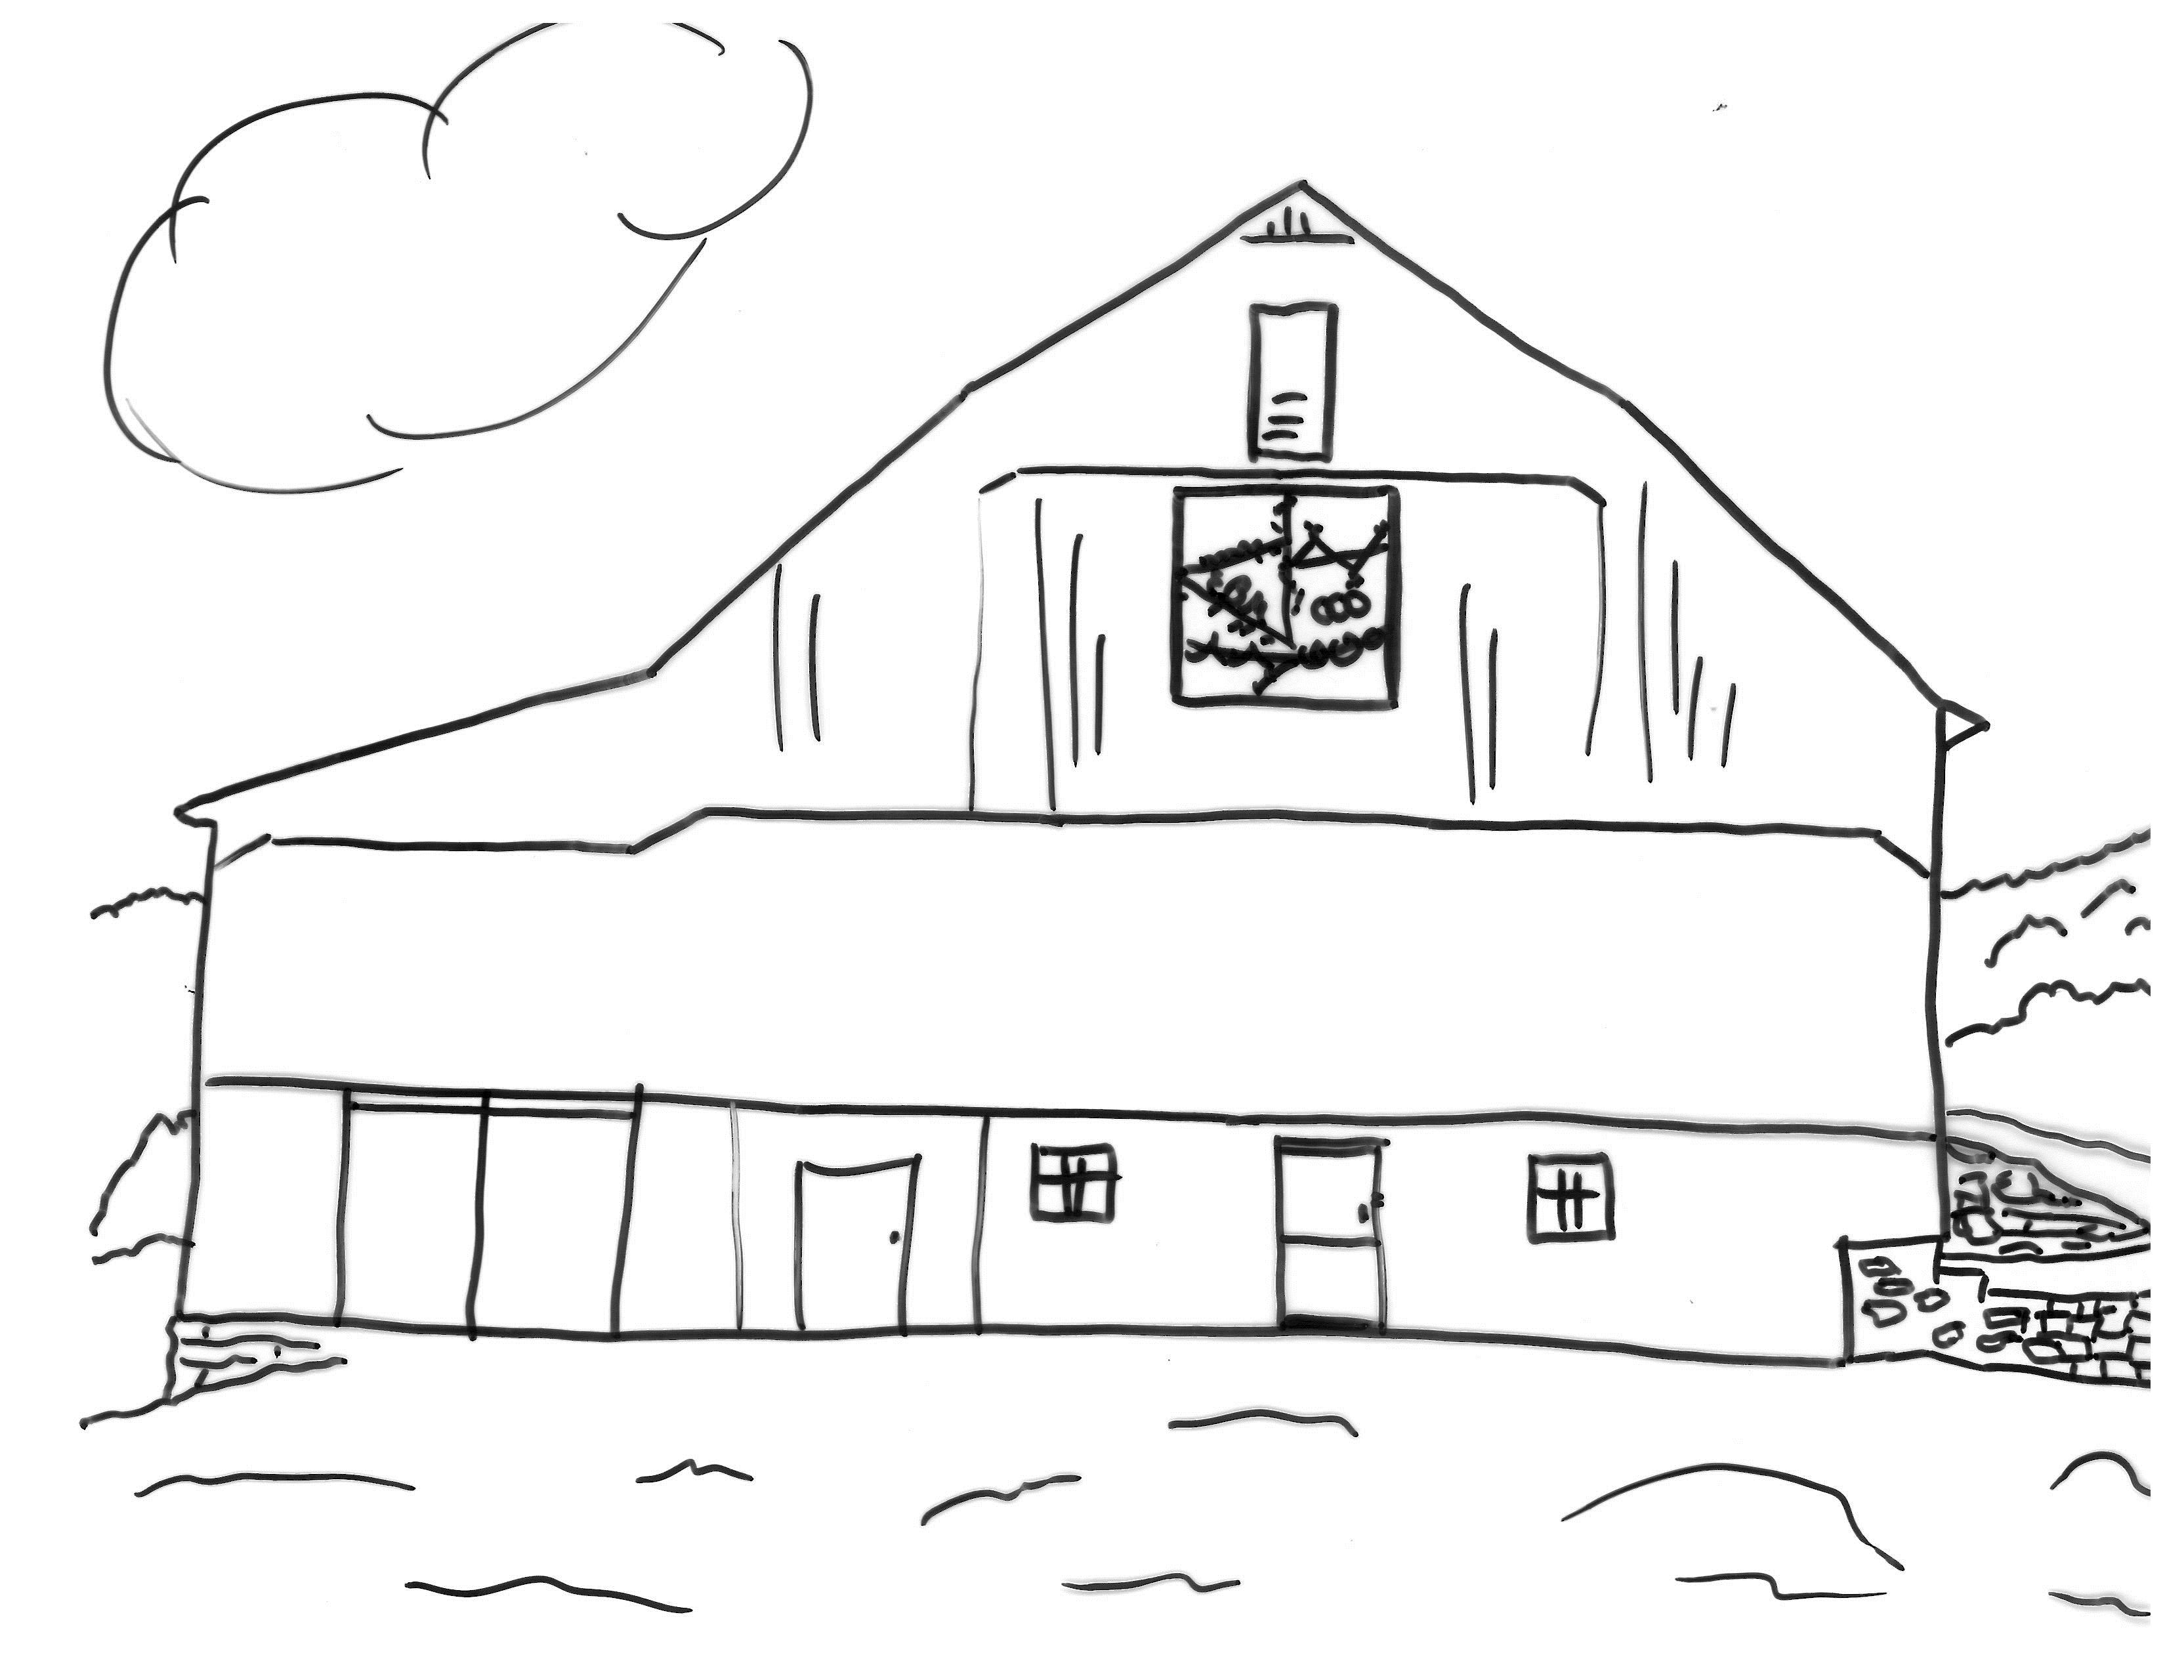 Coloring Pages – Barn Quilts in Garrett County, Maryland